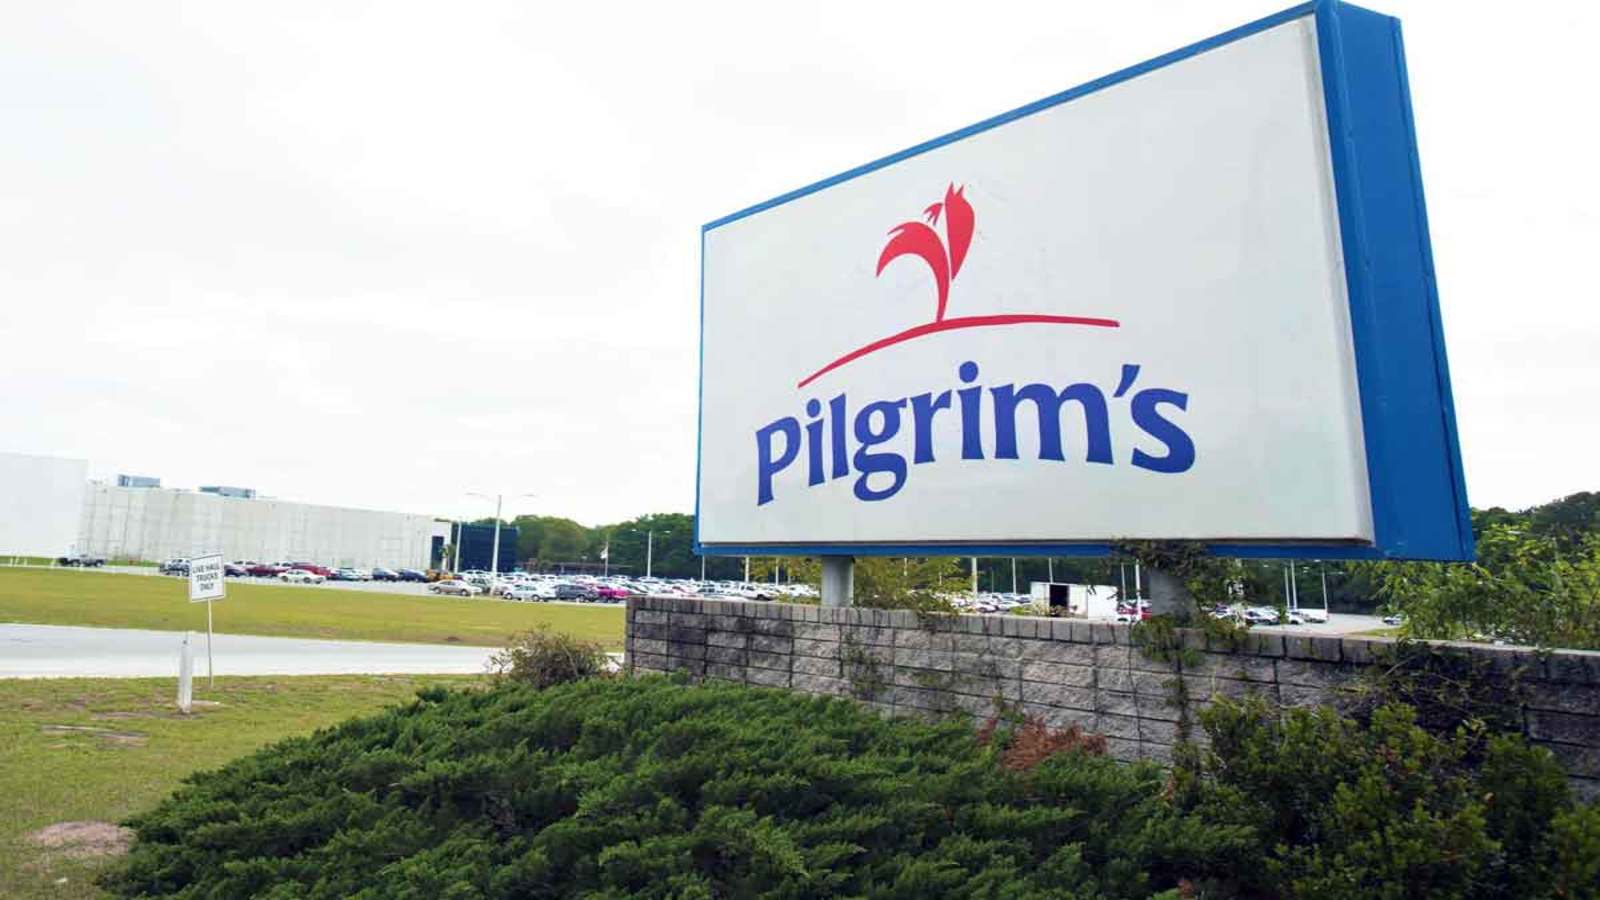 Pilgrim’s Pride invests US$75M million to expand its production facility in Cold Spring